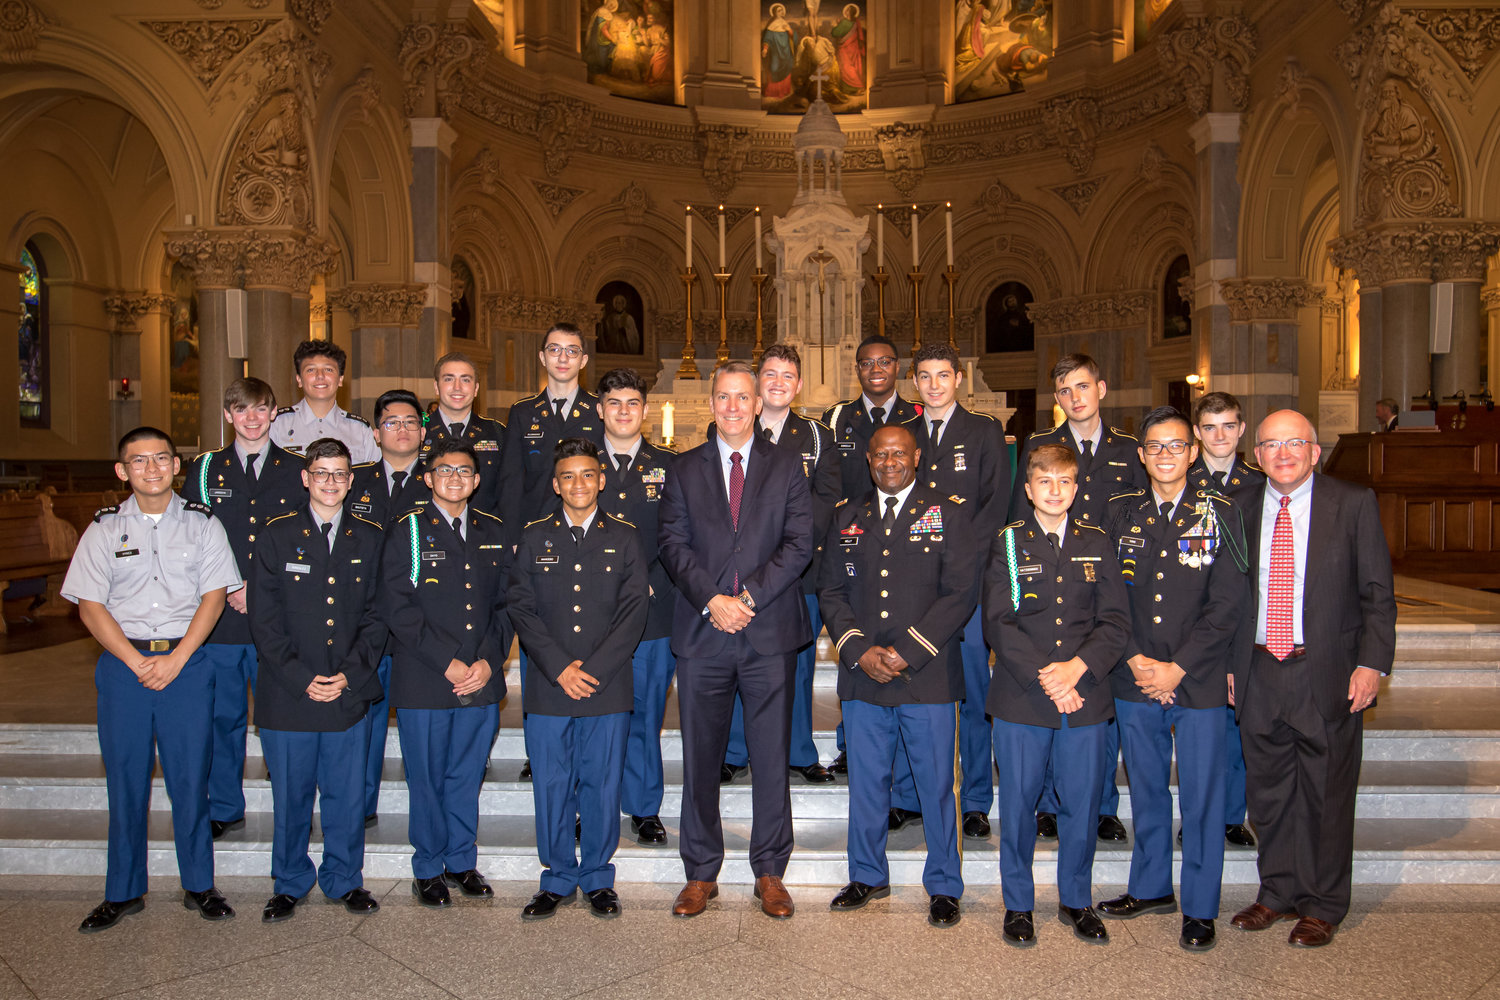 New York City Police Commissioner Dermot Shea, a 1986 alumnus of Xavier High School in Manhattan, is pictured with members of the school’s Army JROTC Regiment Sept. 10 at nearby St. Francis Xavier Church. The commissioner, on behalf of the NYPD, gathered with the school community at a Memorial Mass at the church to remember the 10 alumni and numerous family members and friends lost during the terrorist attacks of 9/11.